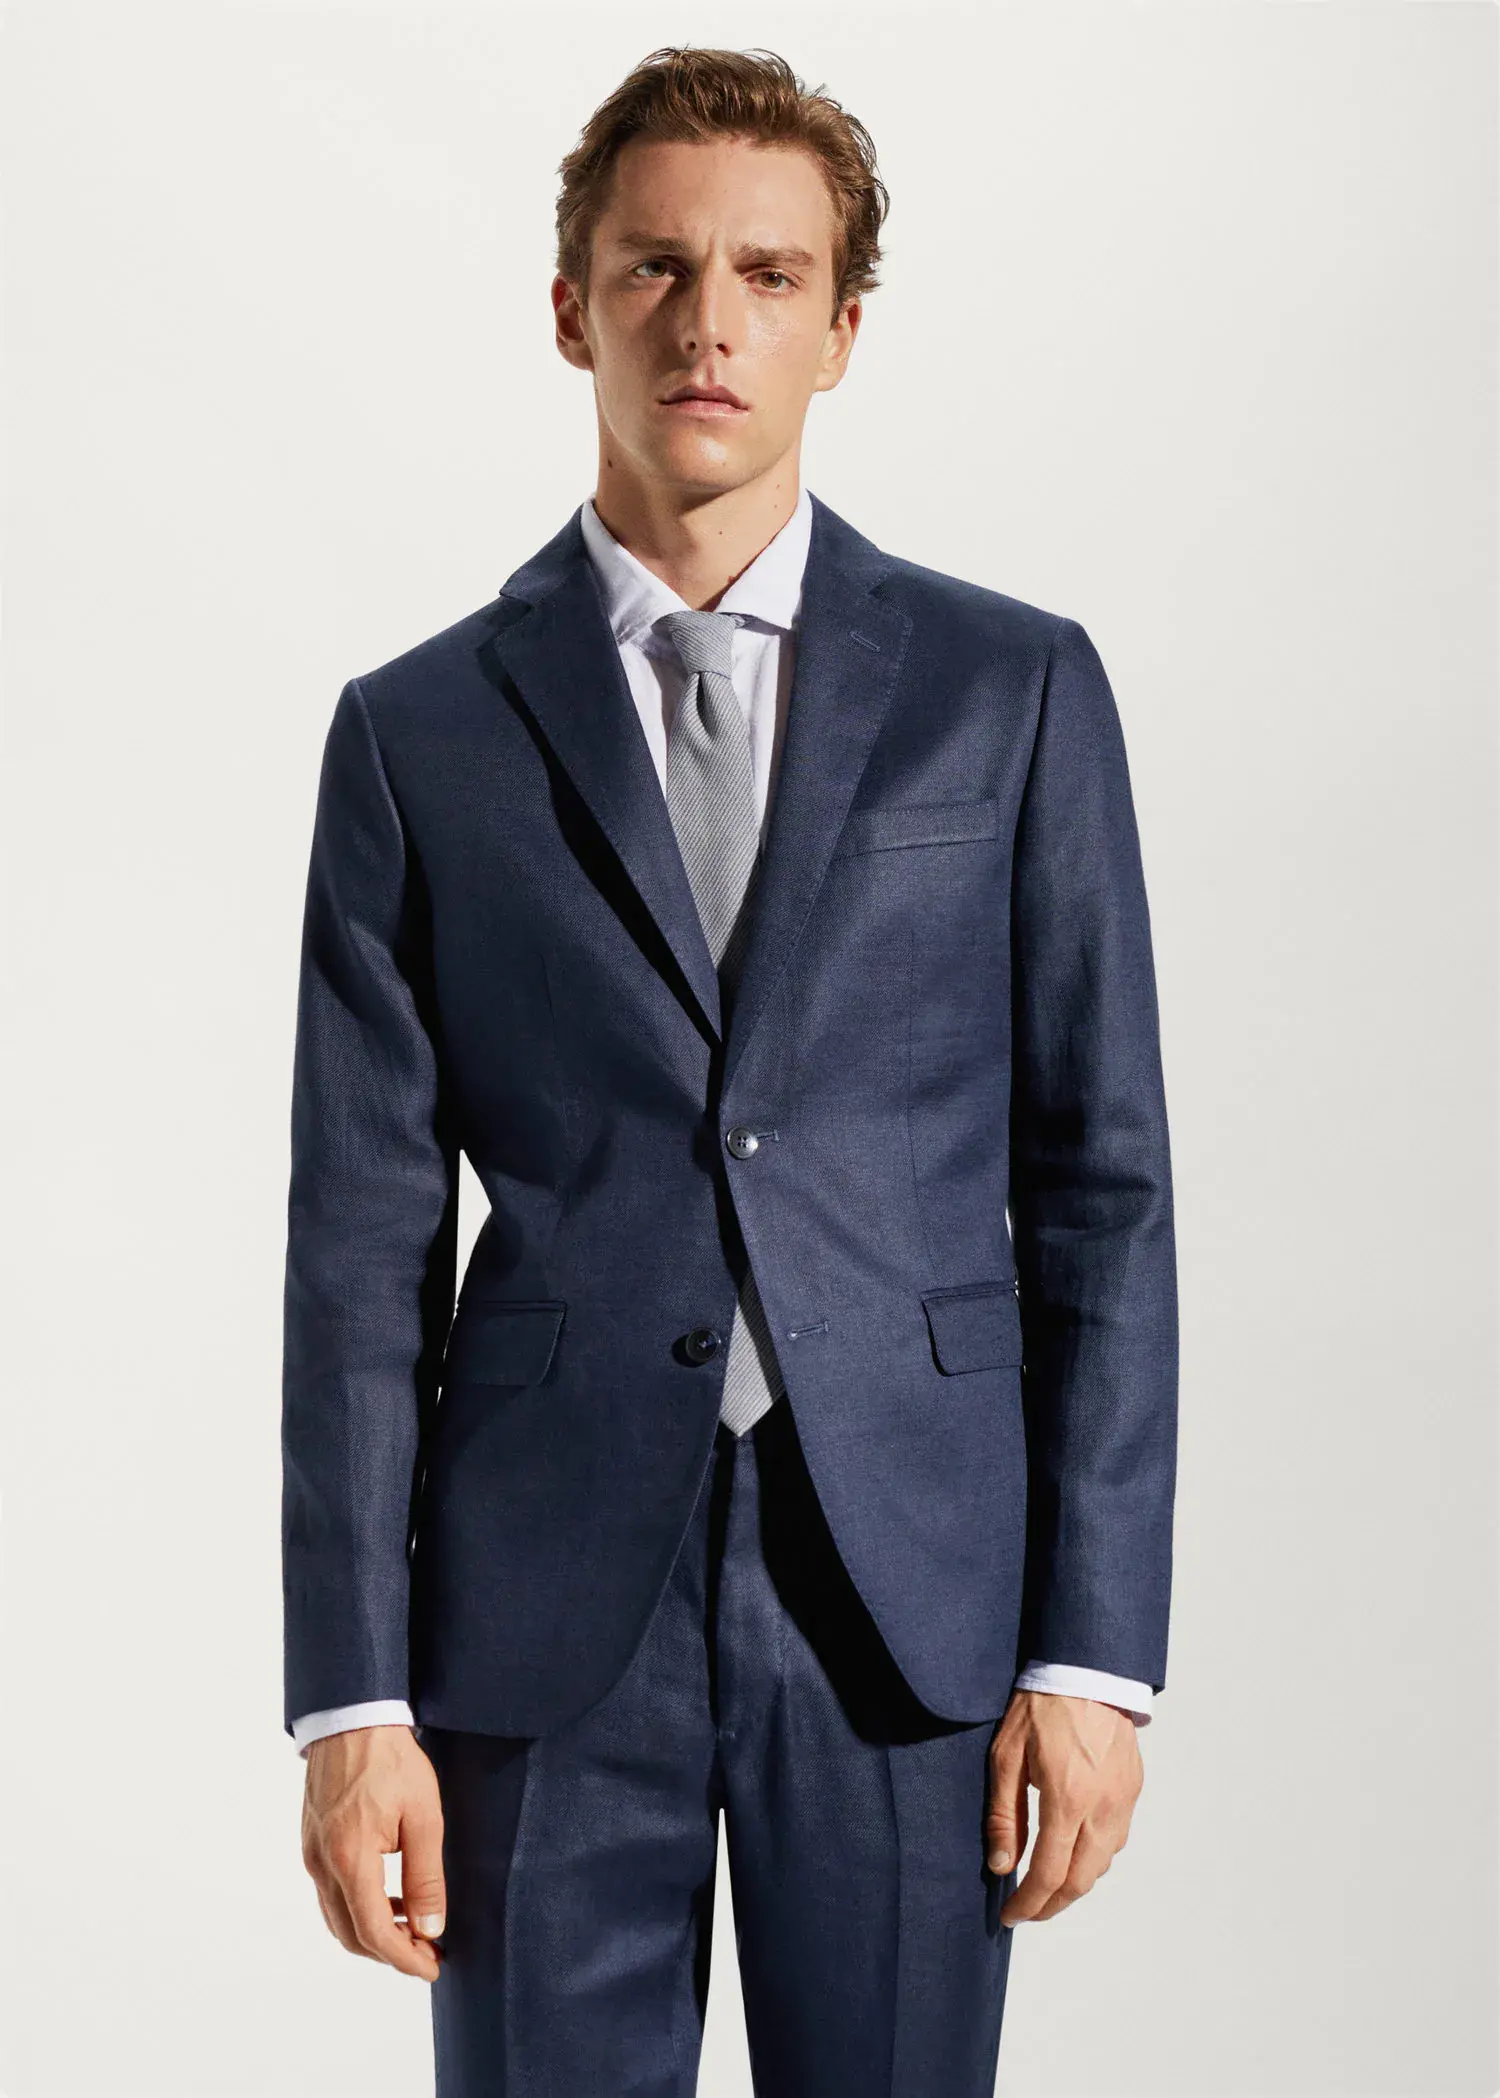 Mango 100% linen suit blazer. a man wearing a suit and tie standing in front of a wall. 